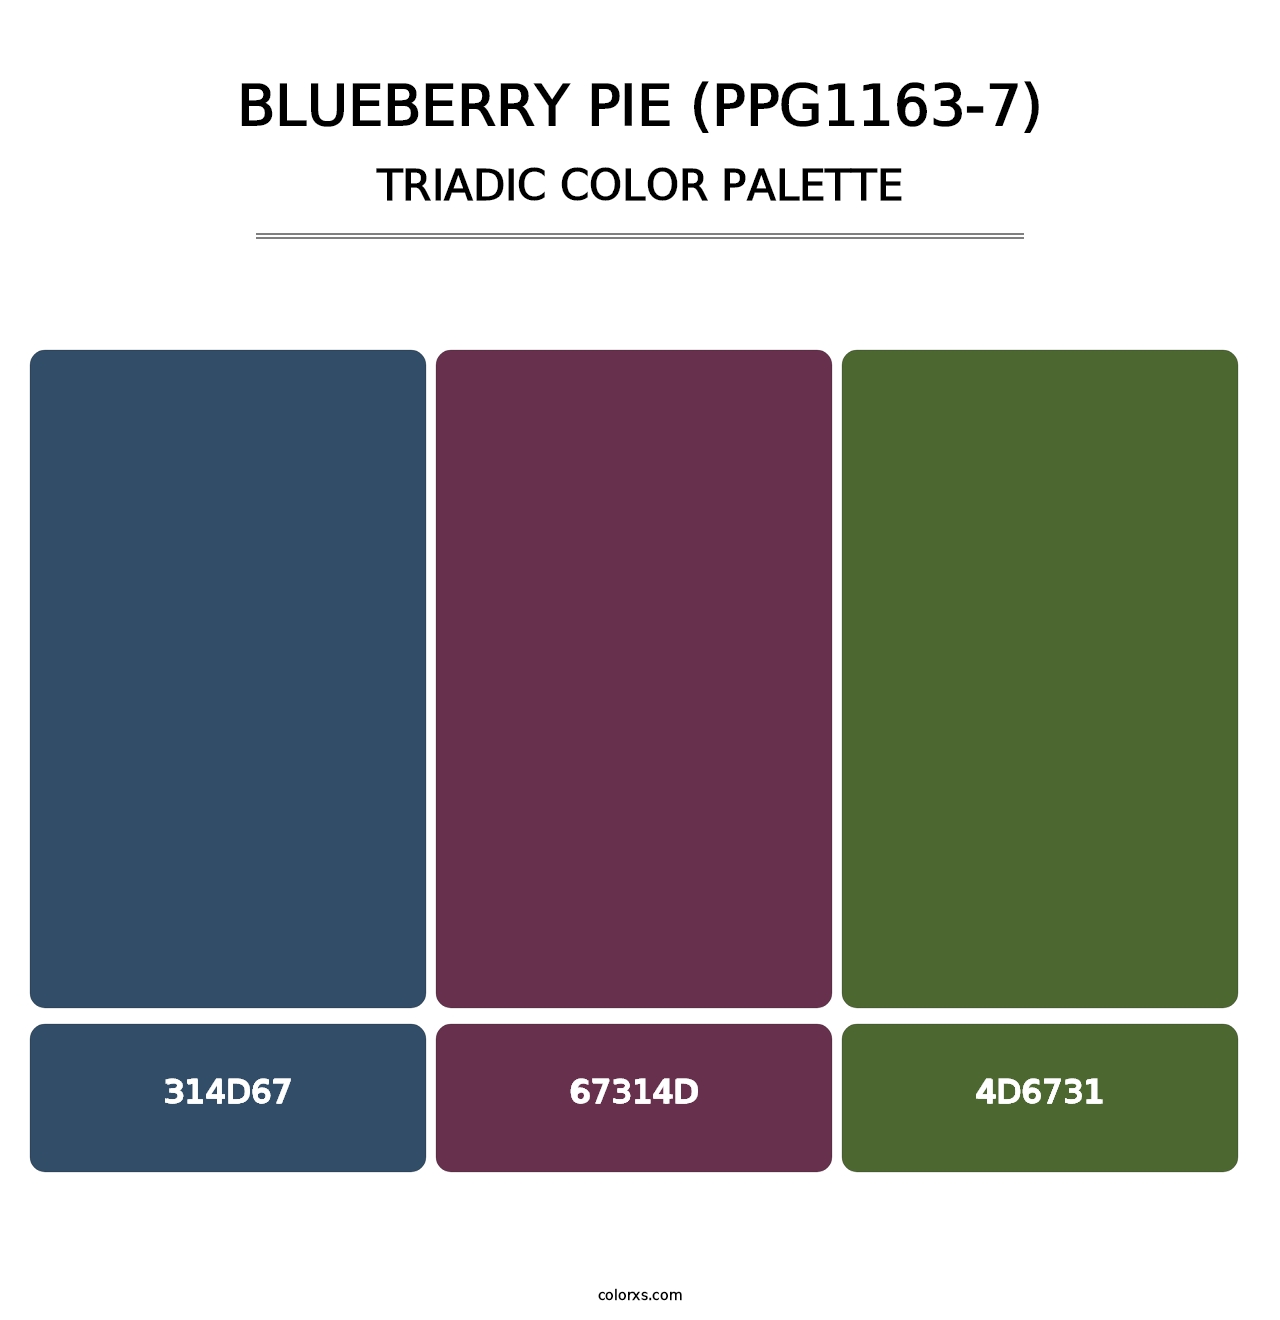 Blueberry Pie (PPG1163-7) - Triadic Color Palette